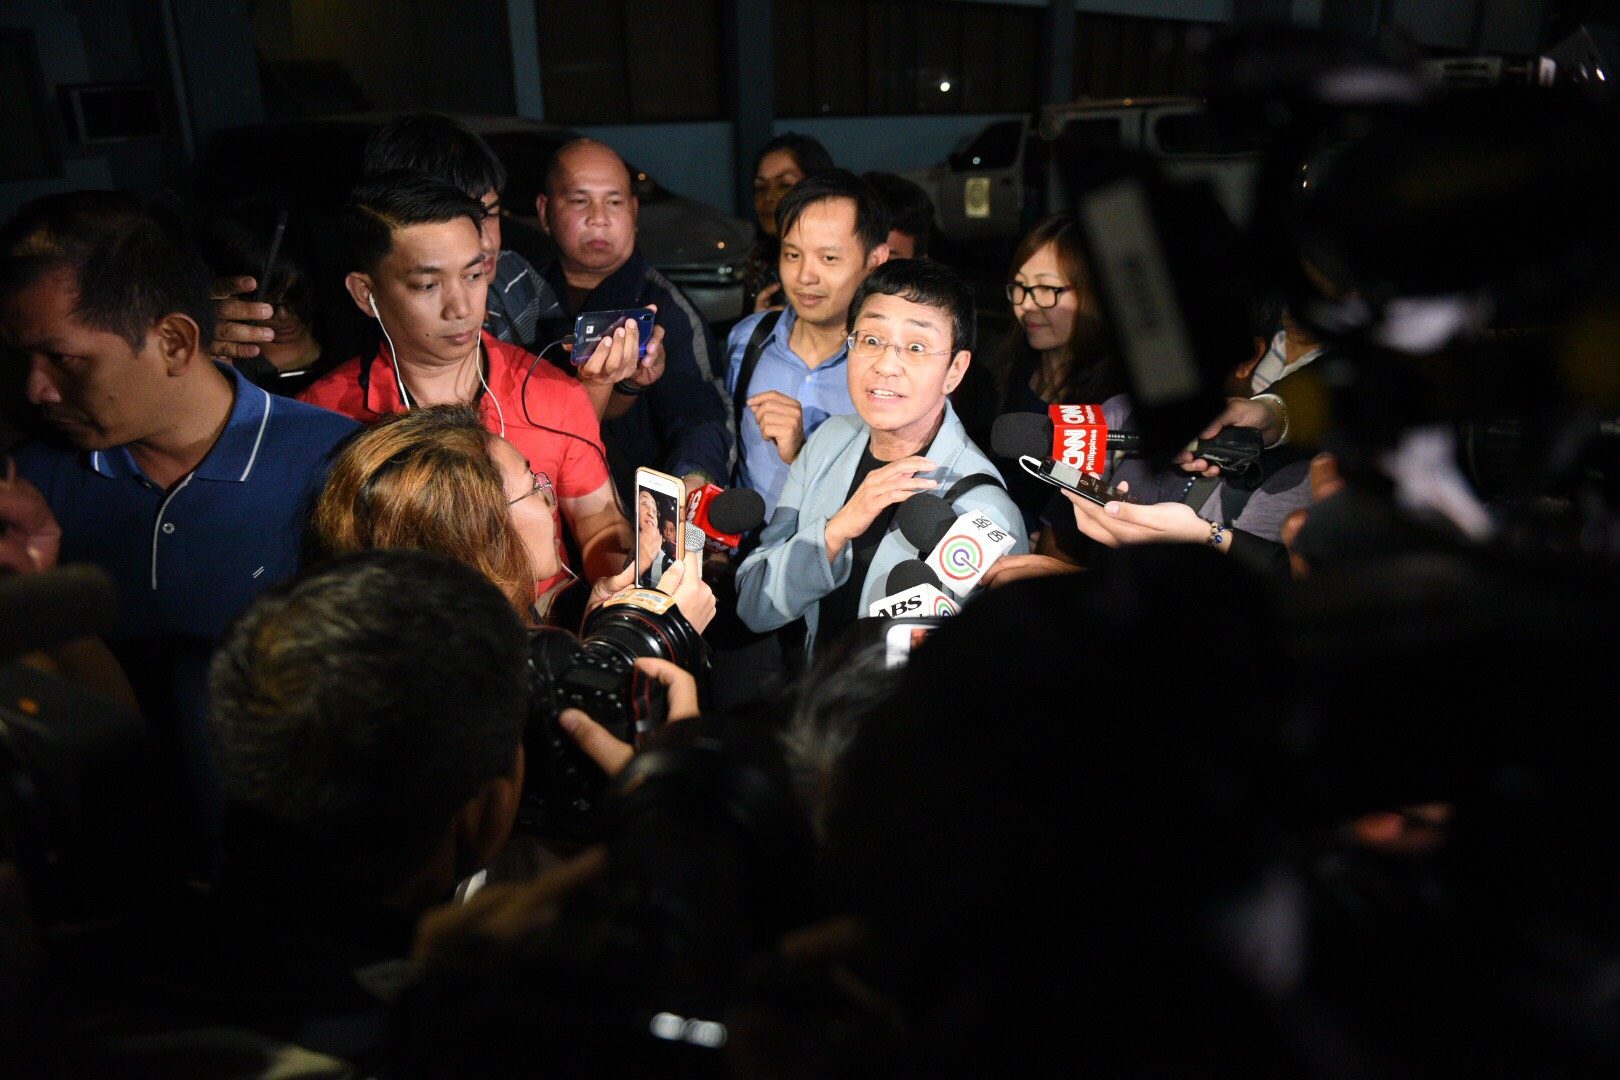 Canada ‘deeply troubled’ by Maria Ressa arrest